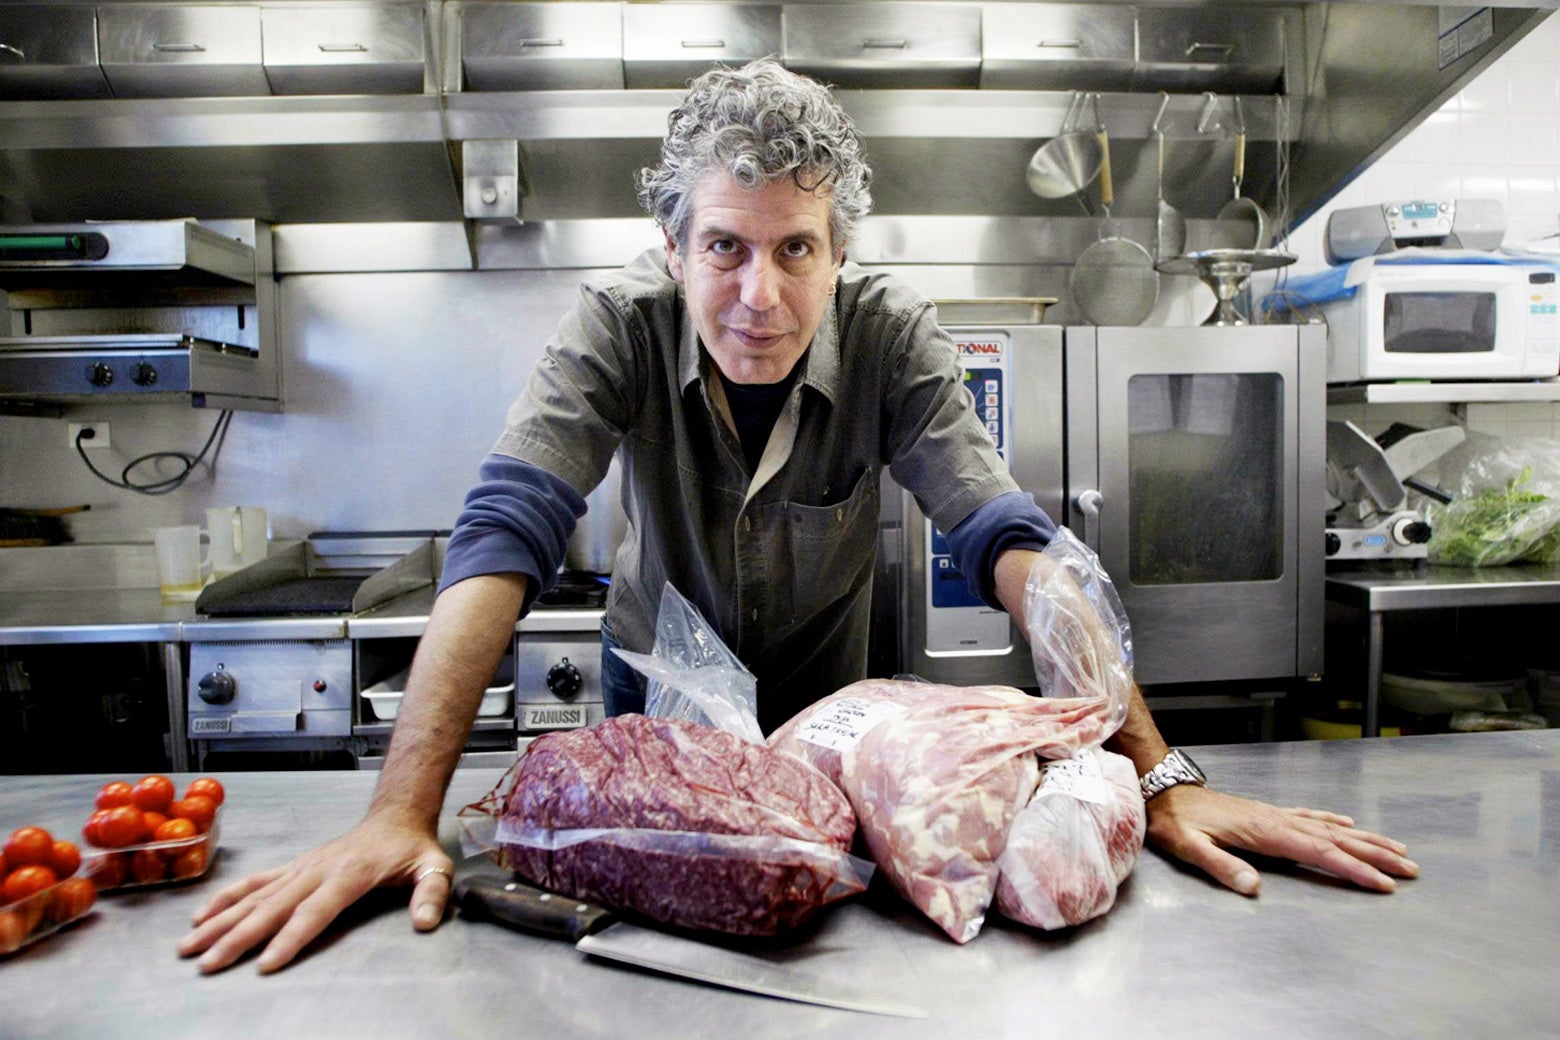 Anthony Bourdain leans over a counter in a stainless-steel kitchen. There are bags of meat and a knife on the counter.